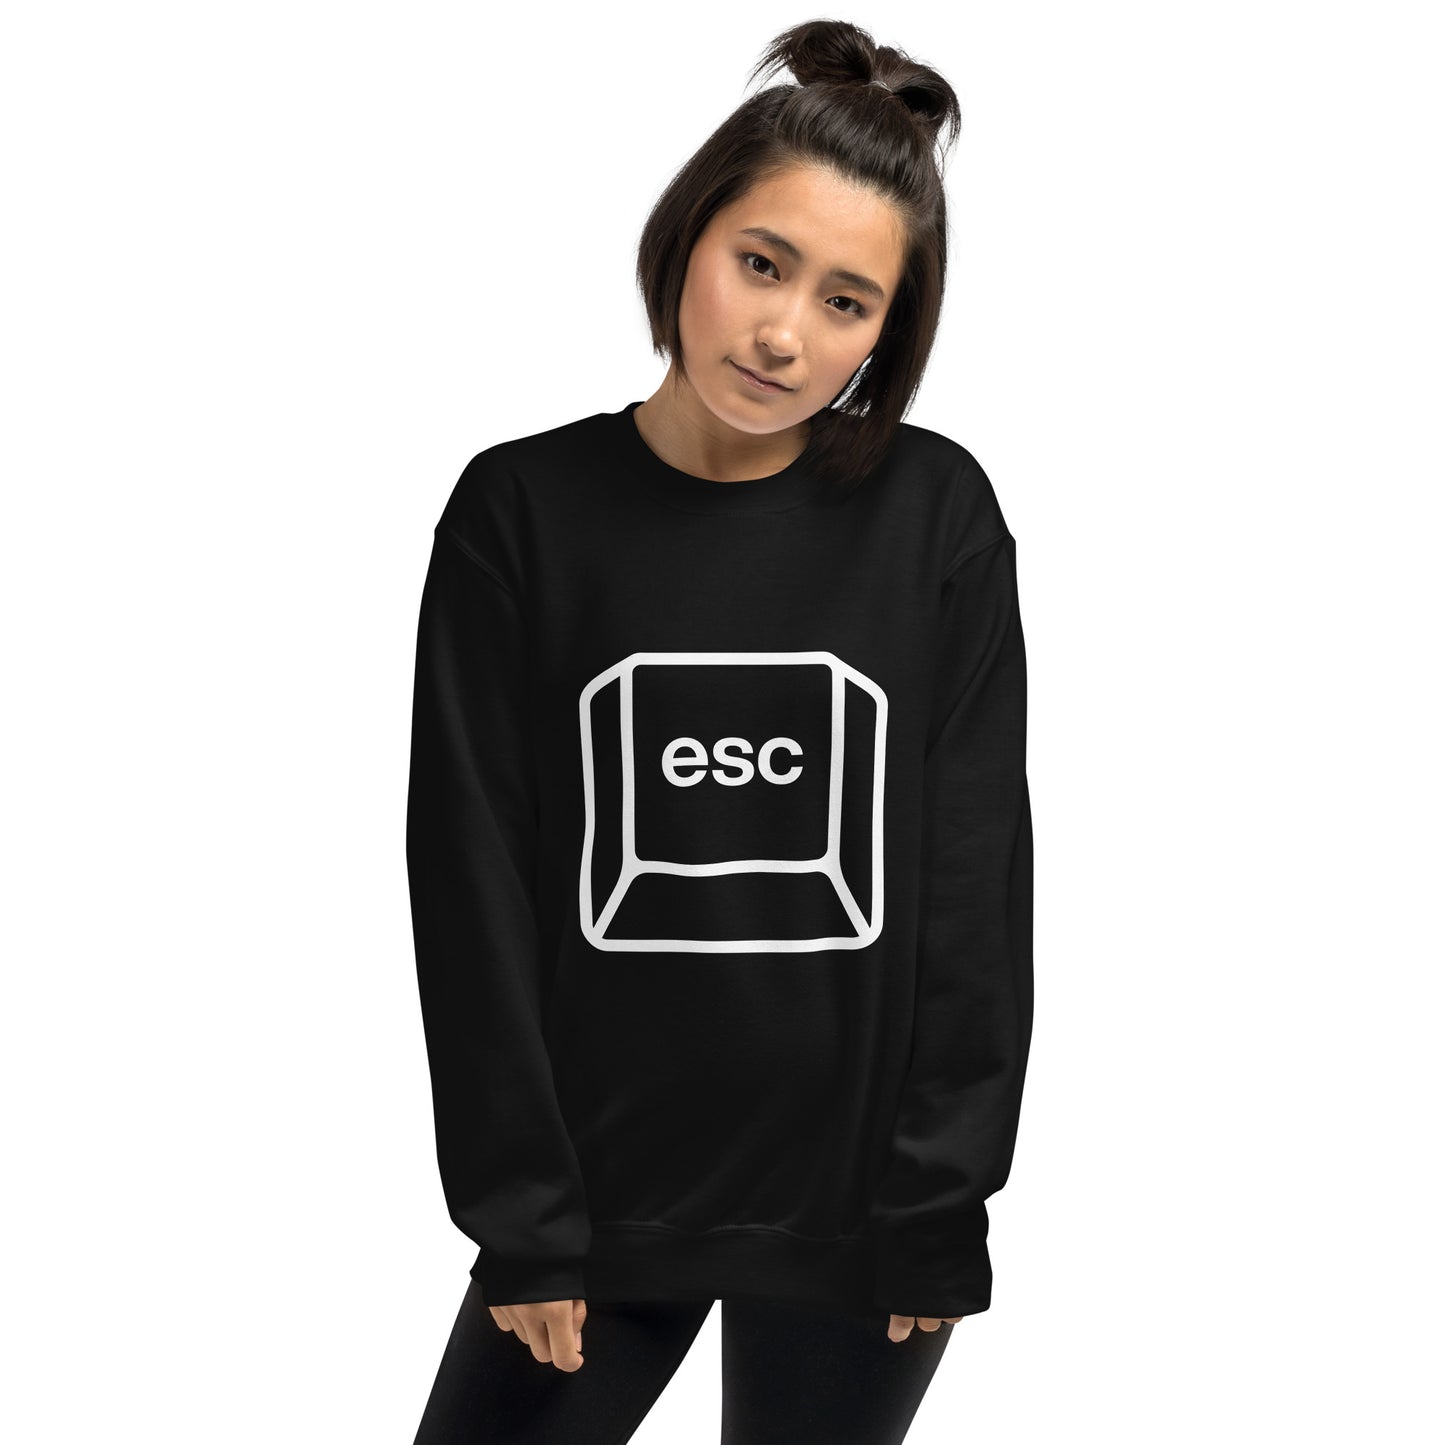 Woman with black sweatshirt with picture of esc key